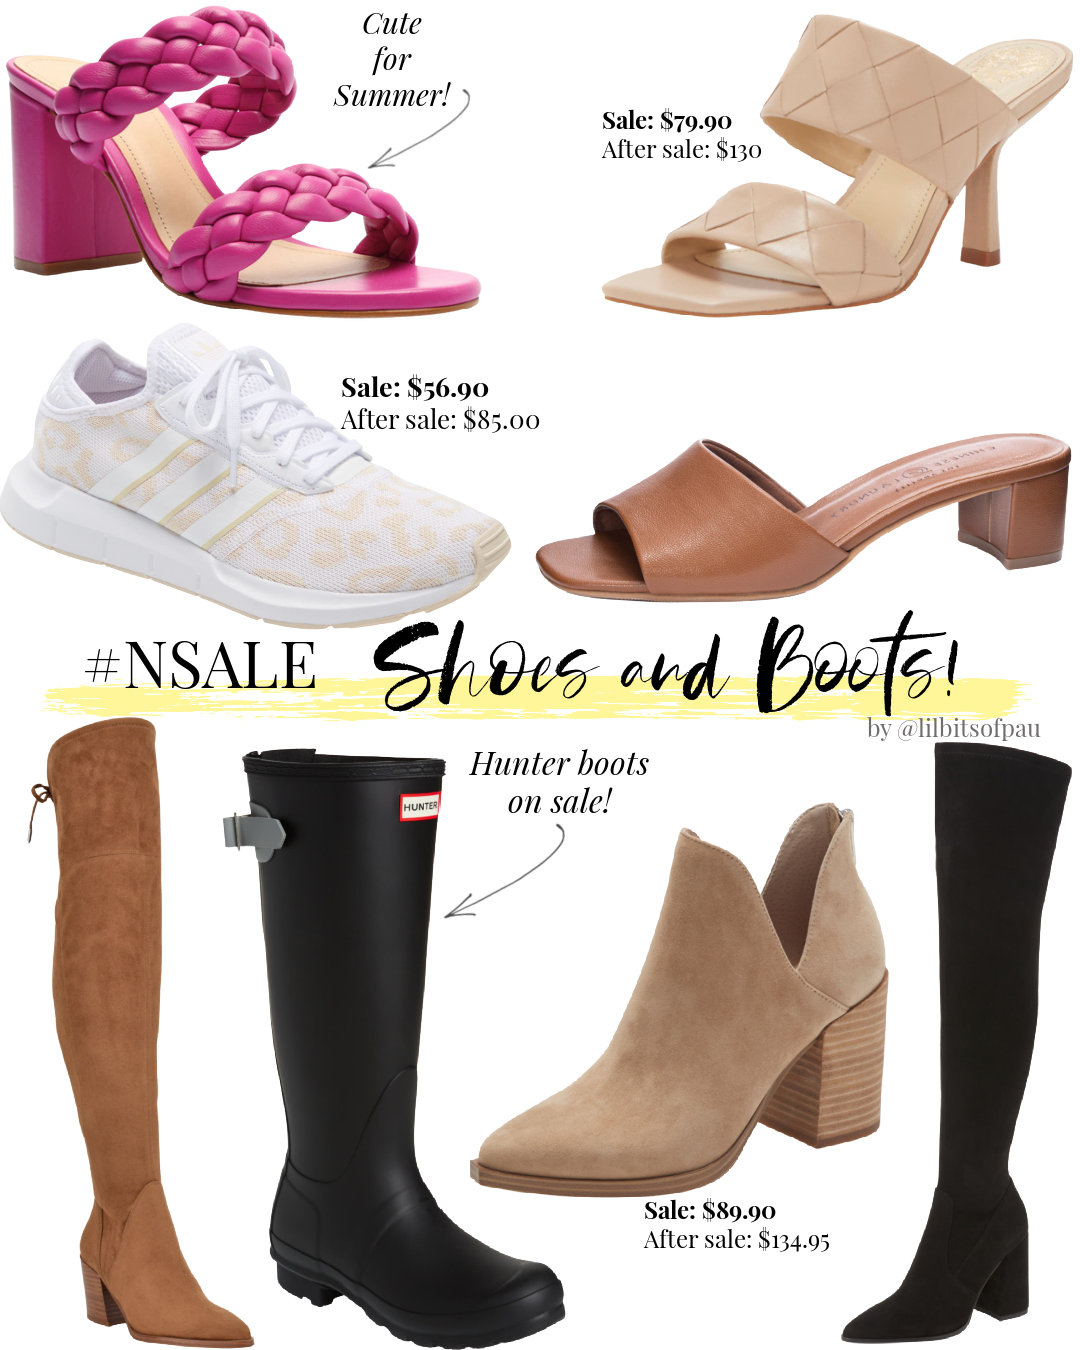 Nordstrom Anniversary Sale 2021 shoes, NSale 2021 boots